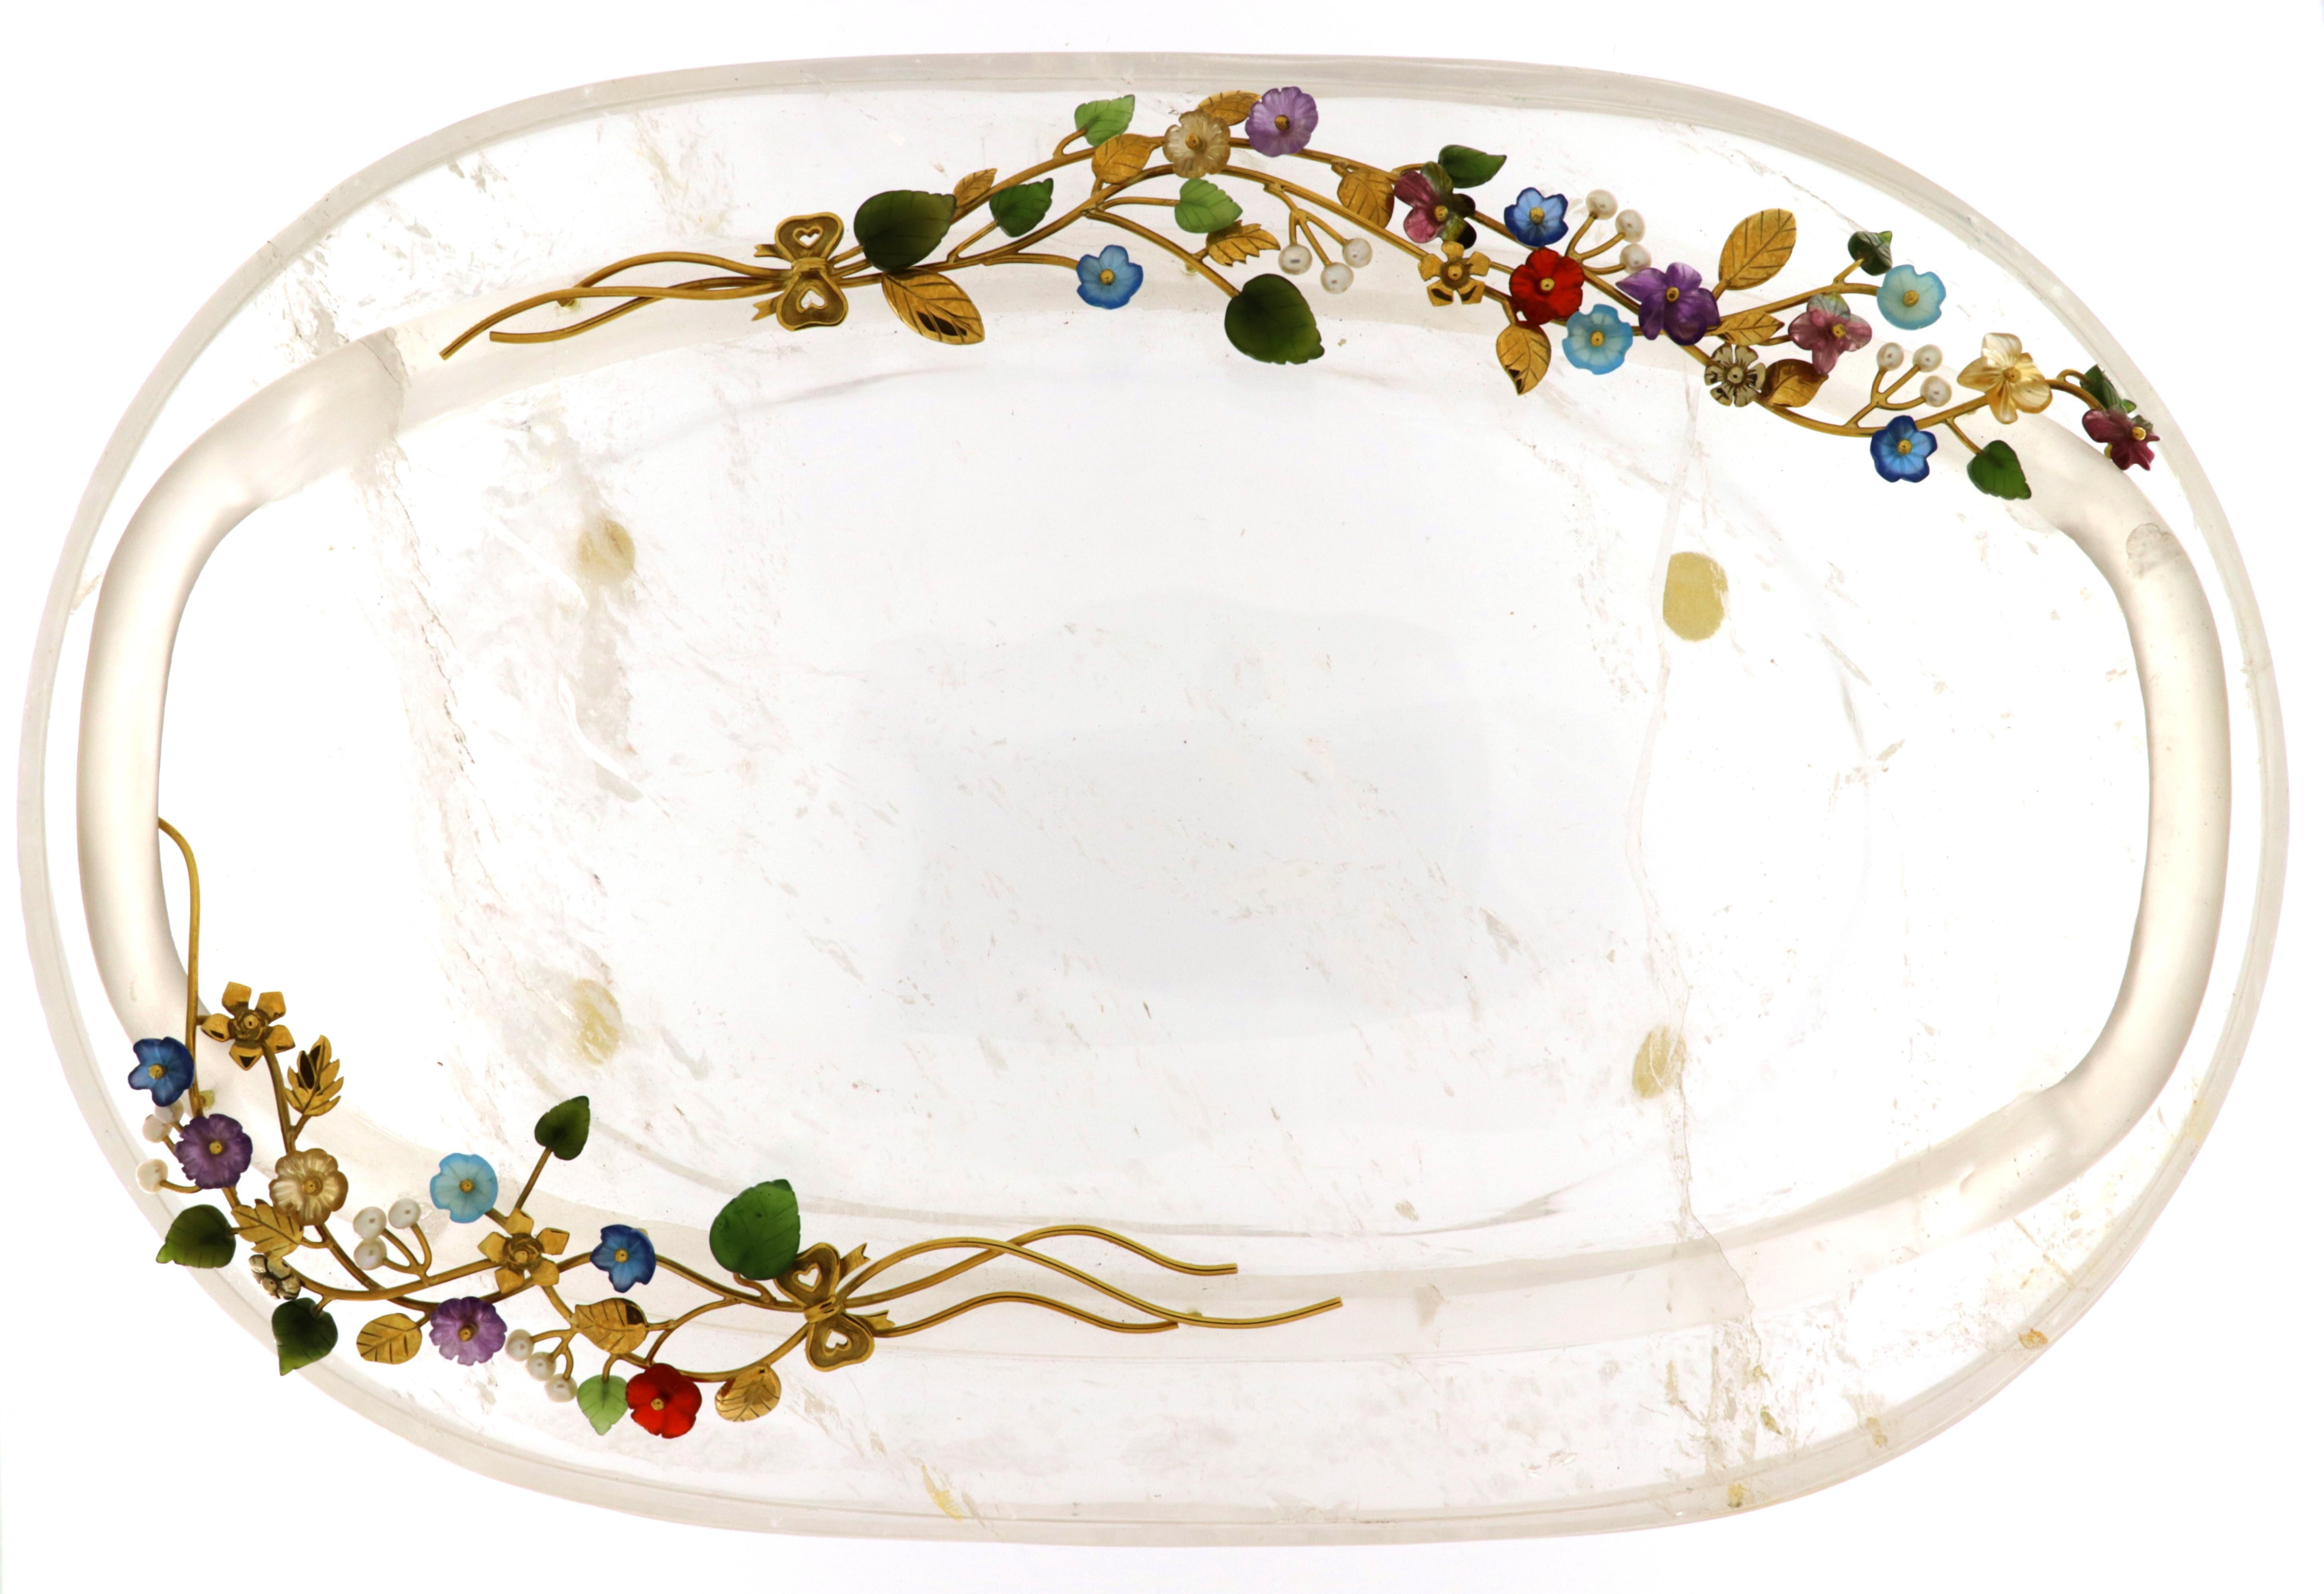 Rose Cut Rock Cristal Box with Yellow Gold Elements and Semiprecious Stones as Flowers For Sale